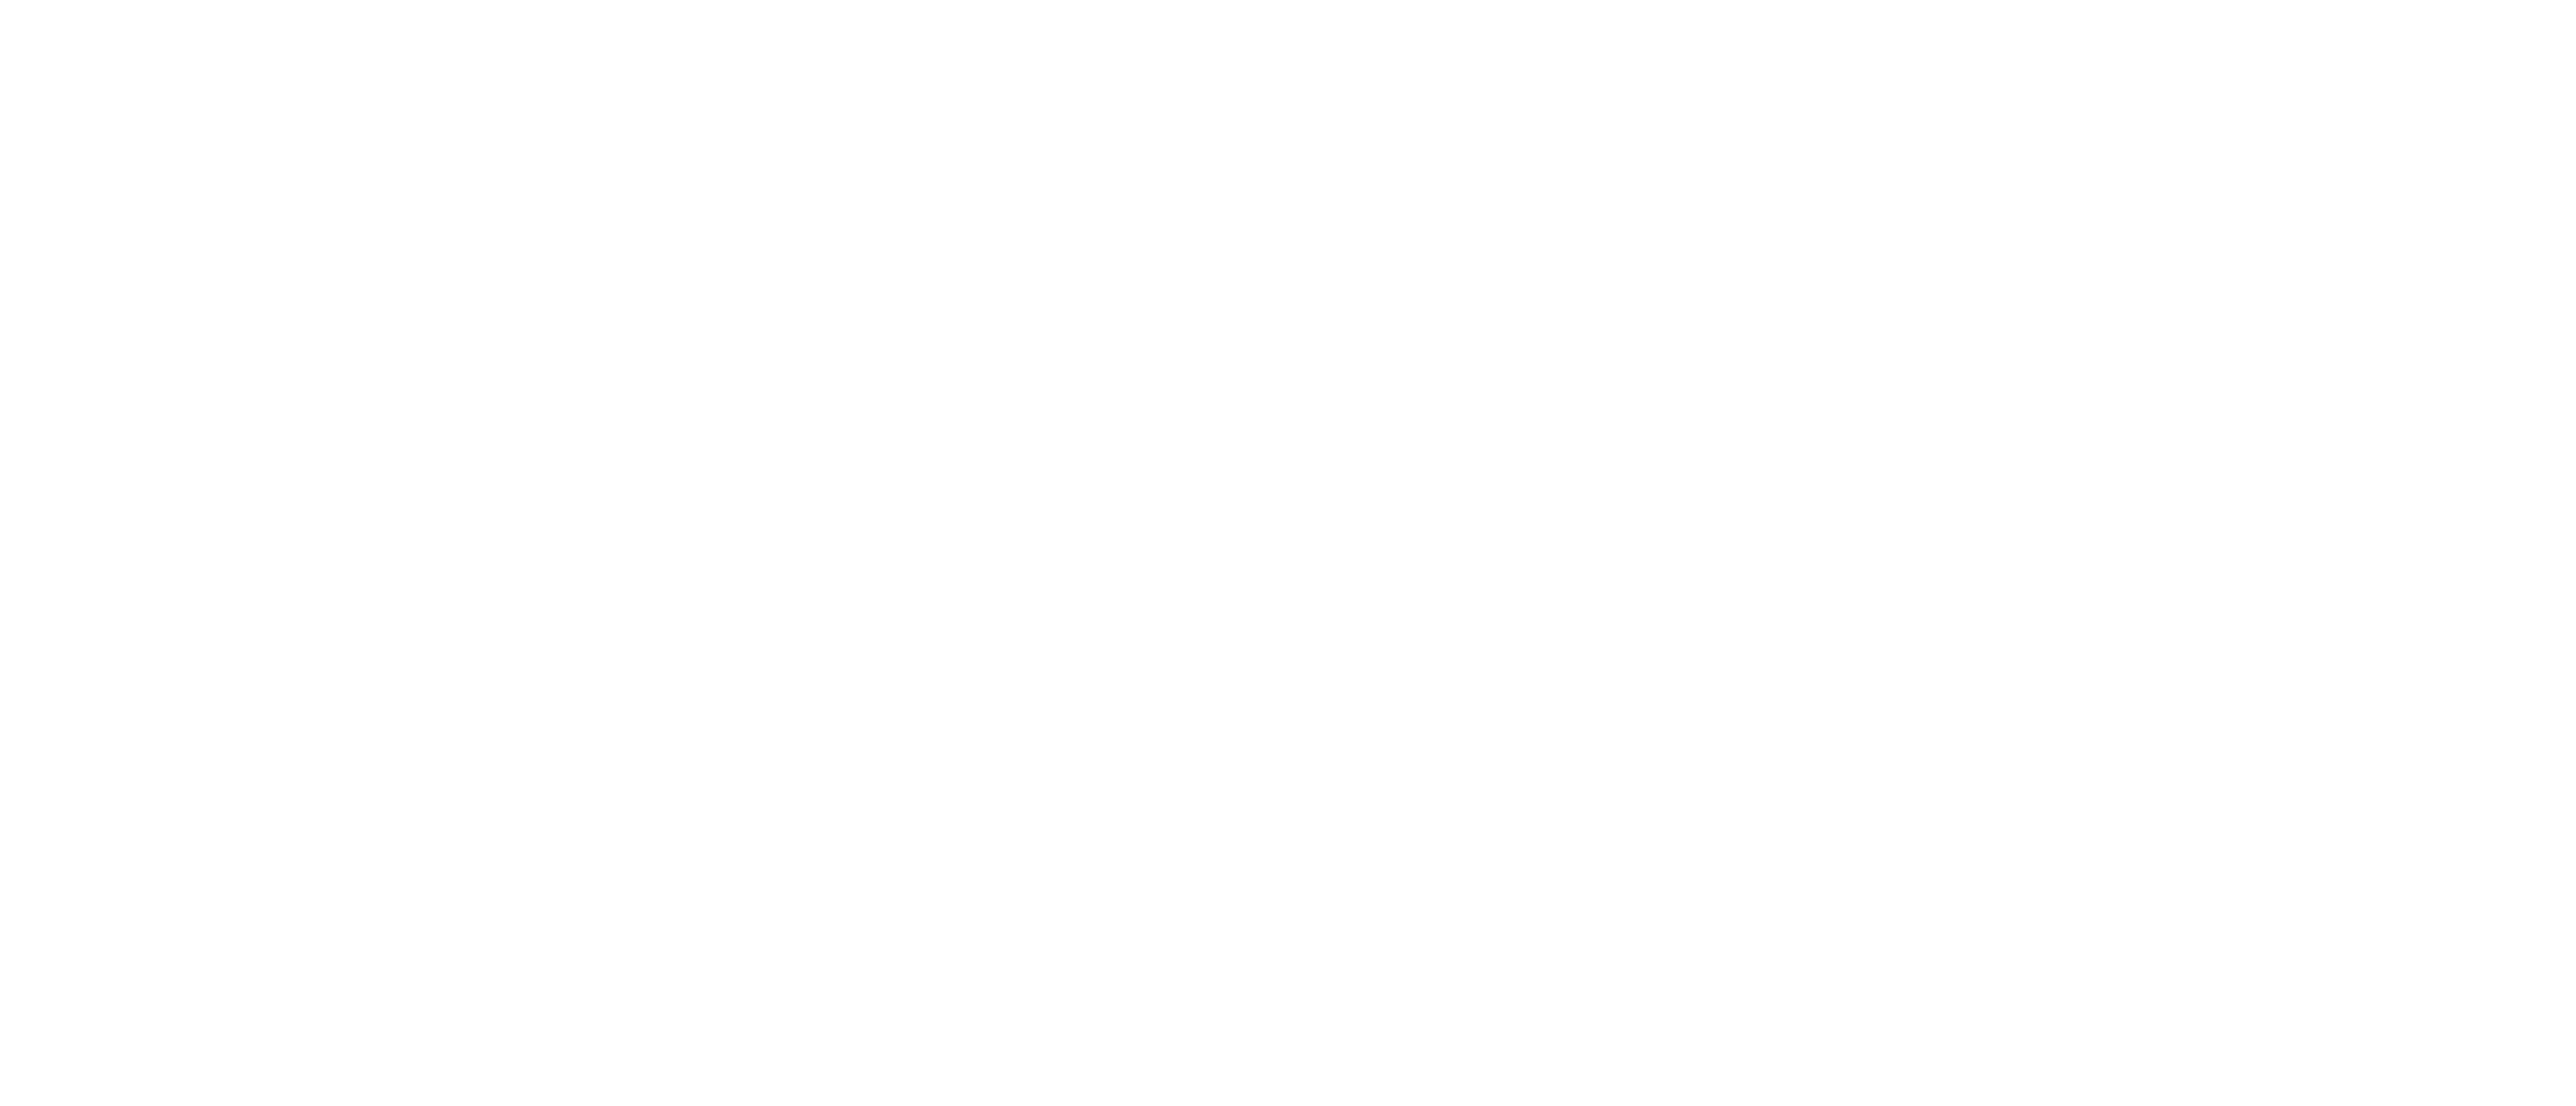 how research help the community